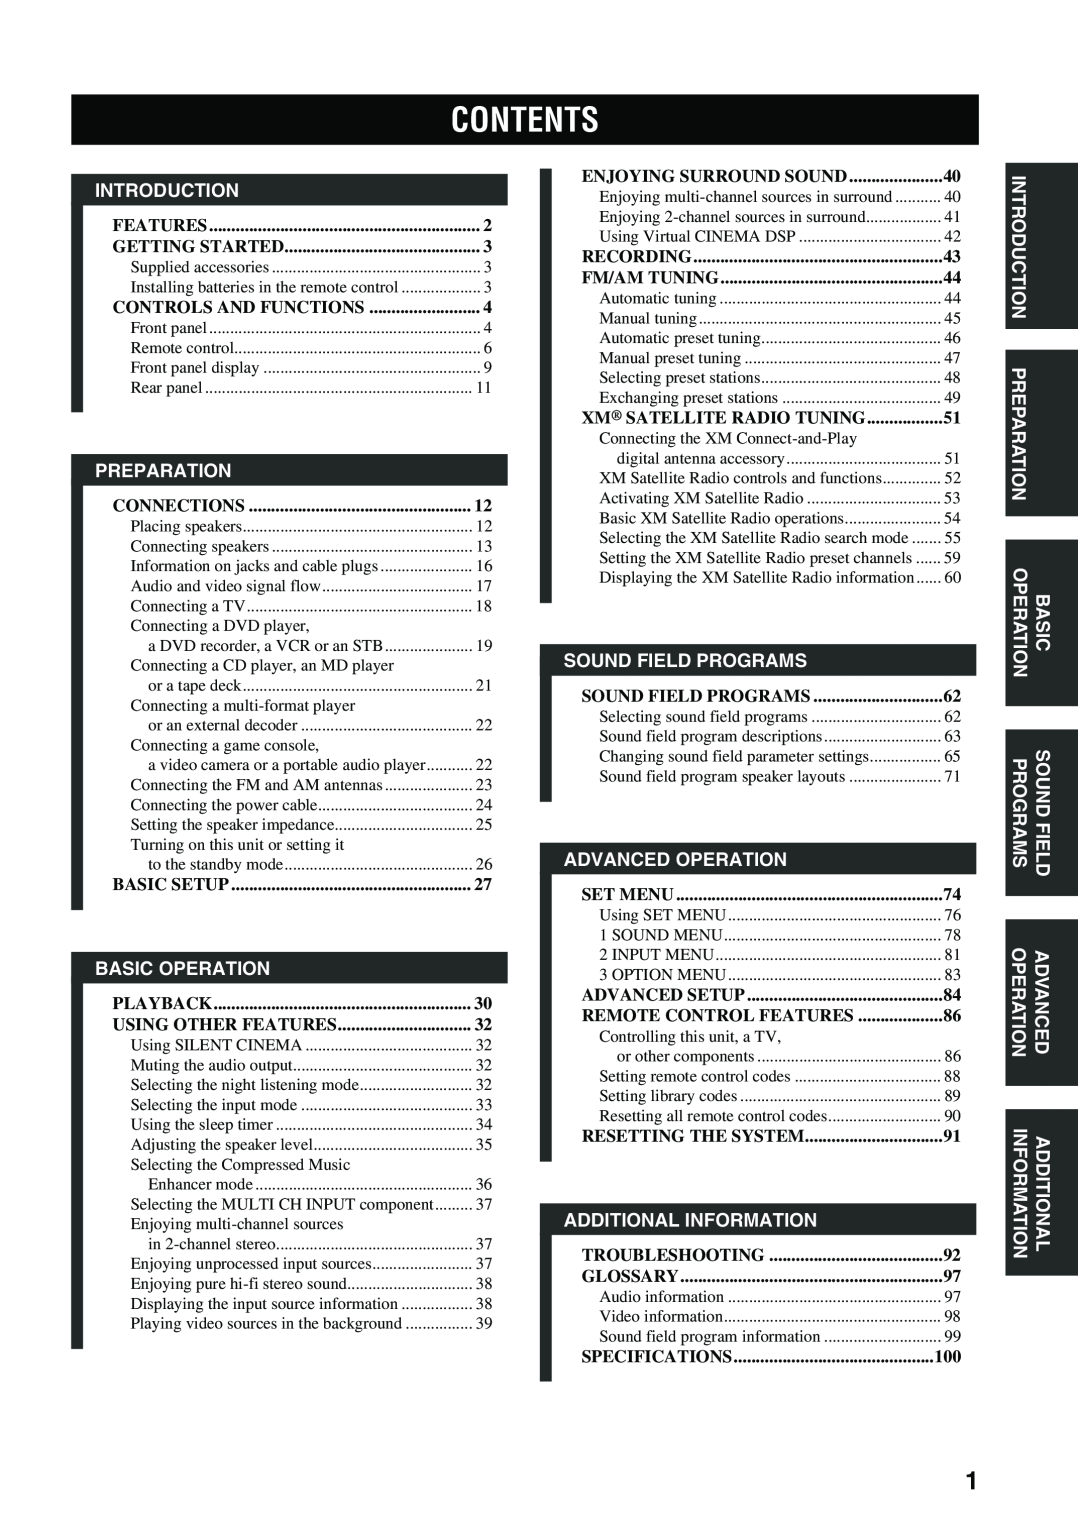 Yamaha HTR-5940 owner manual Contents 